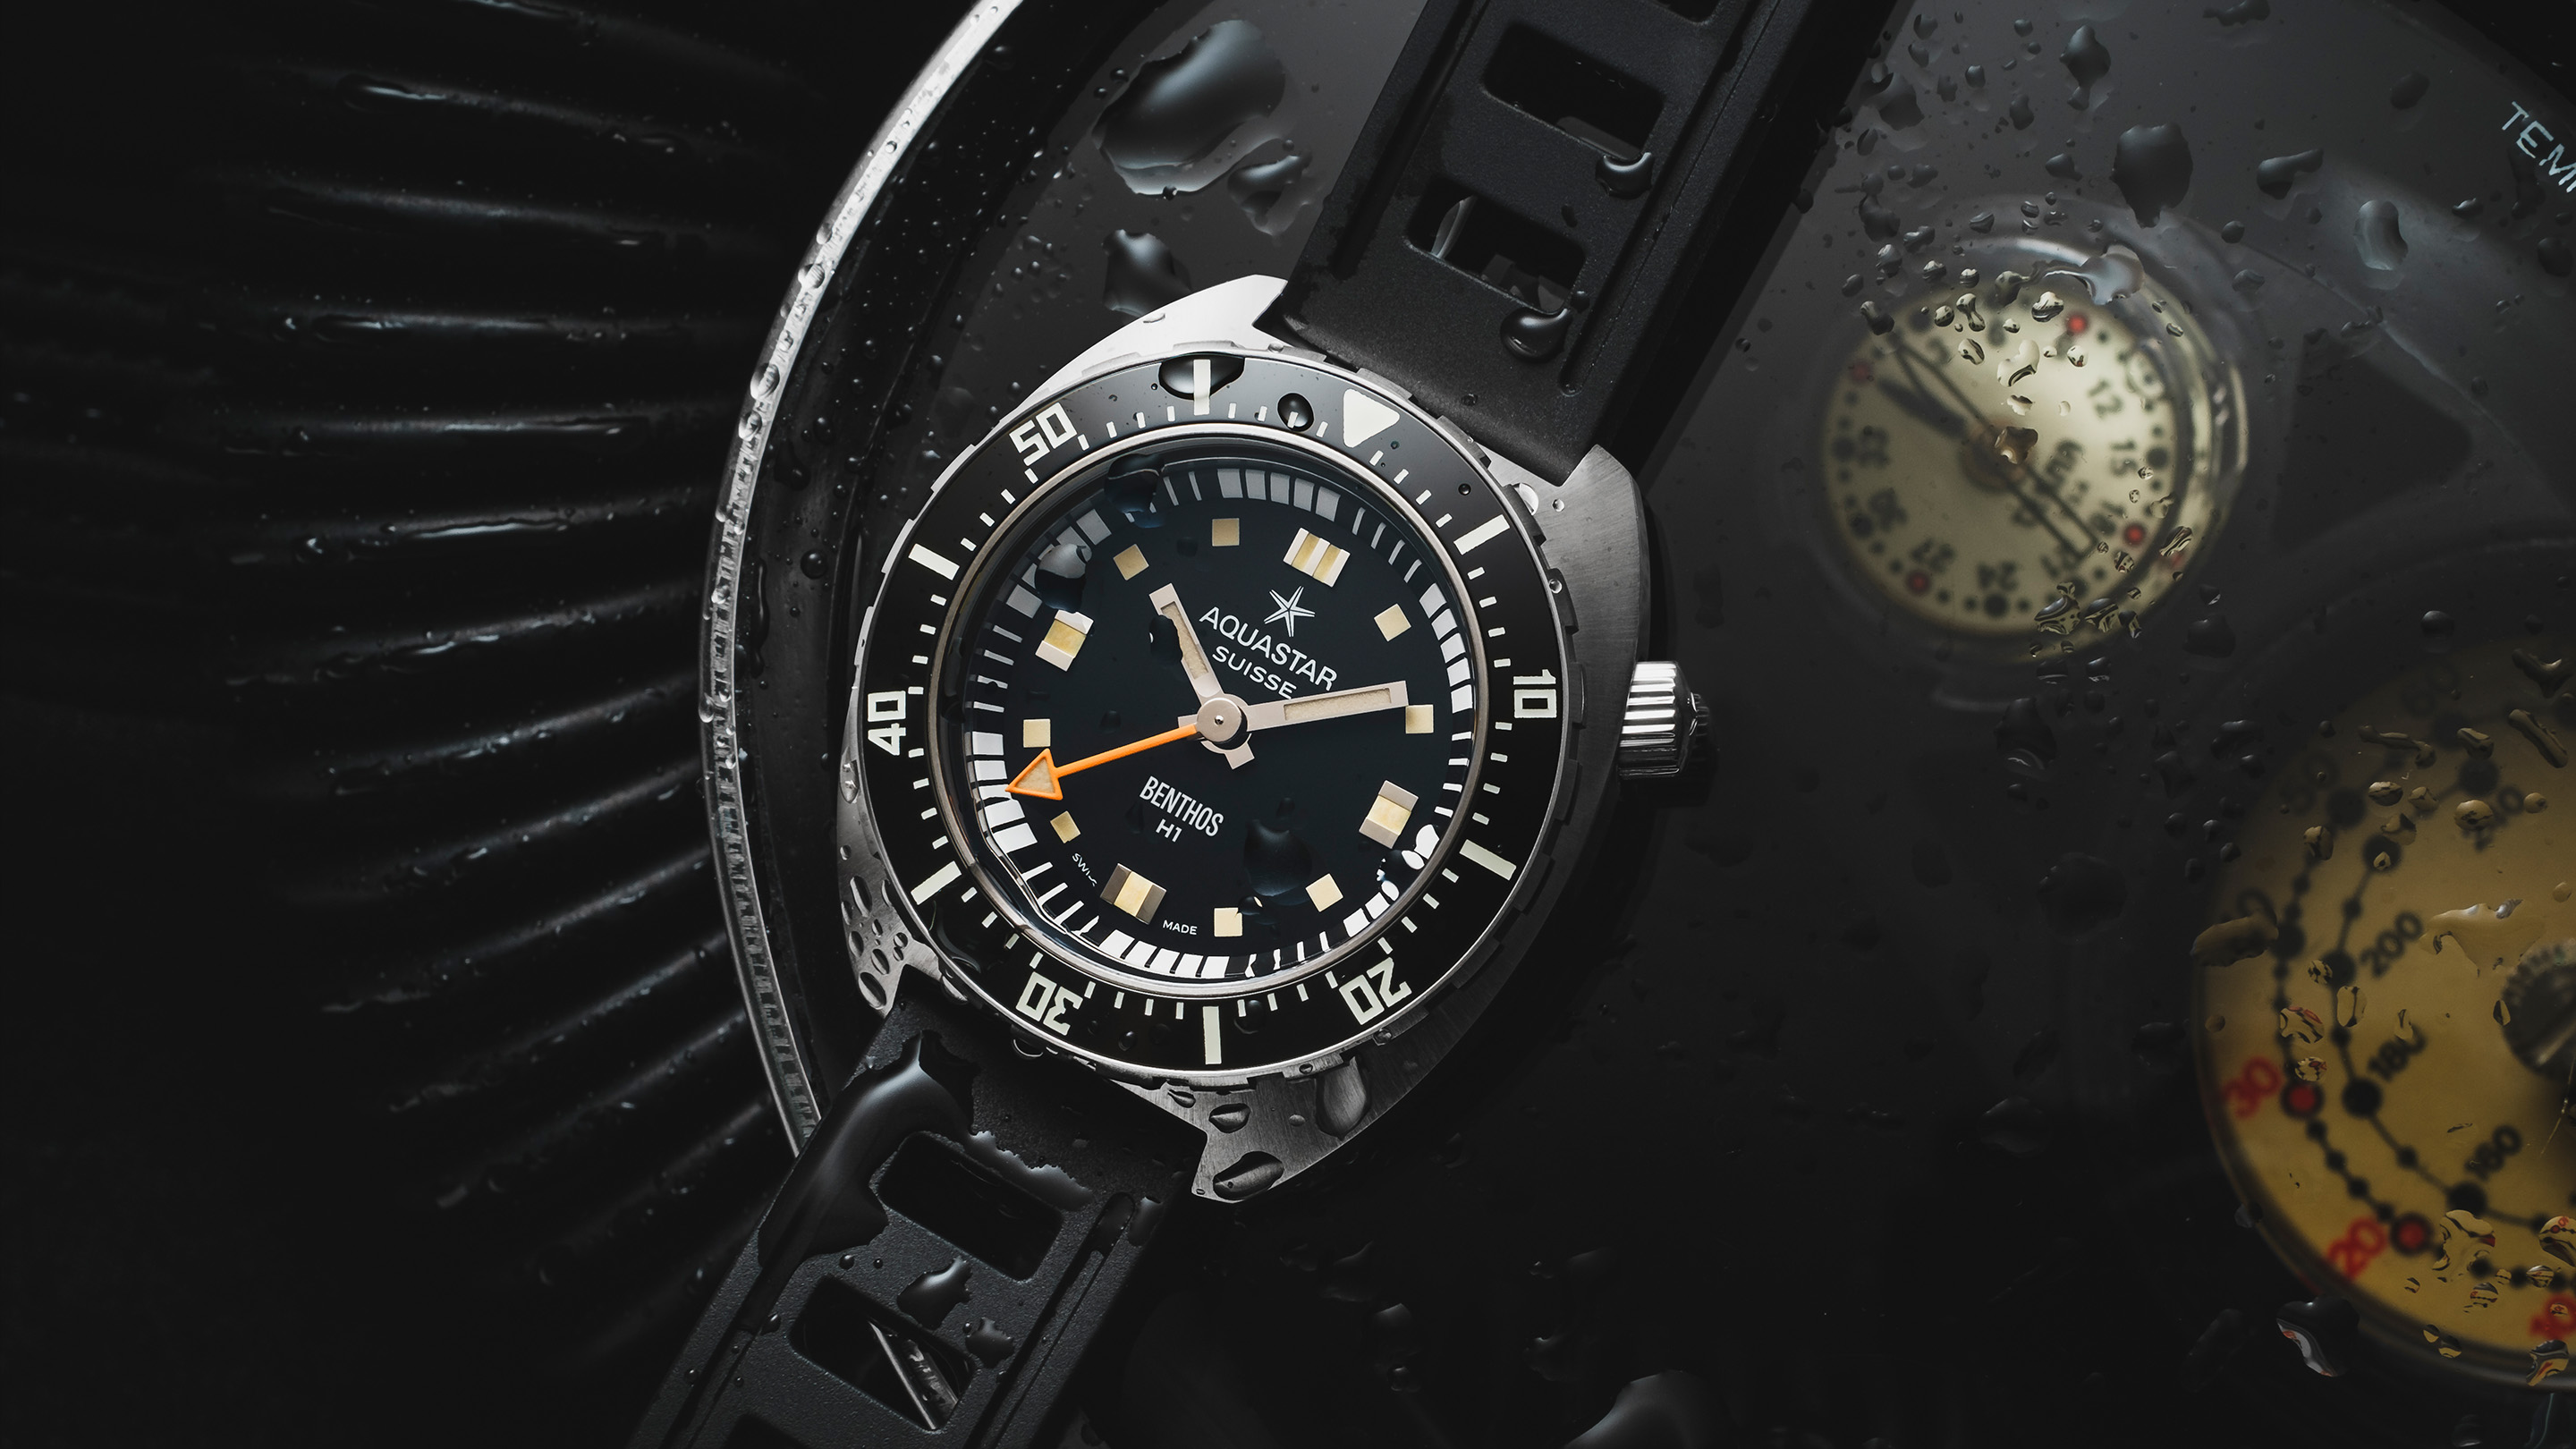 HYT H1.0 hydro mechanical watch places time in perpetual fluid motion